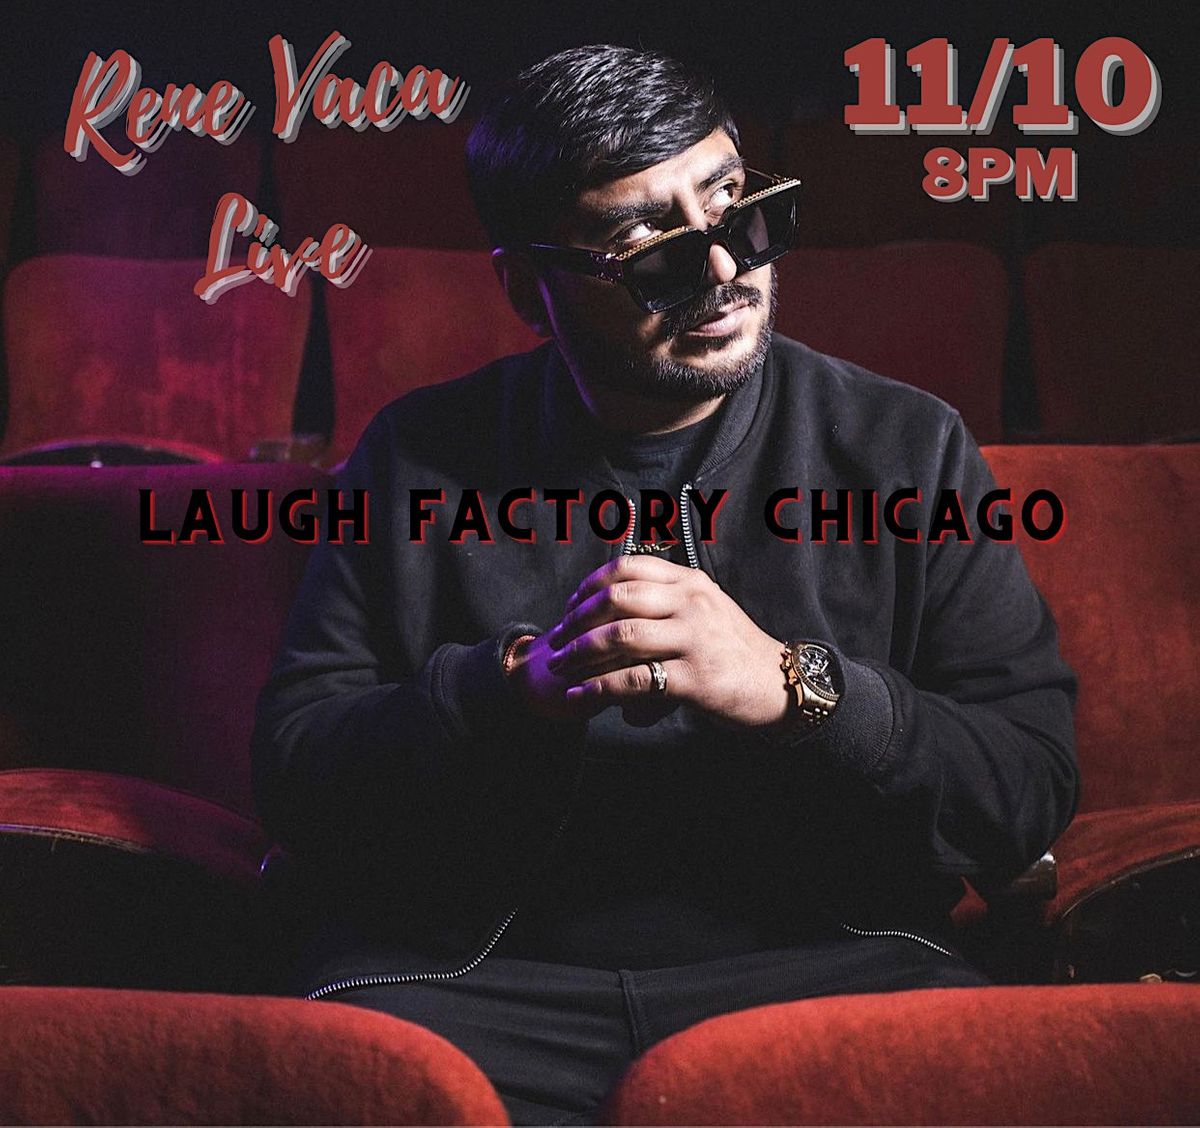 Rene Vaca & Friends LIVE at Laugh Factory Chicago